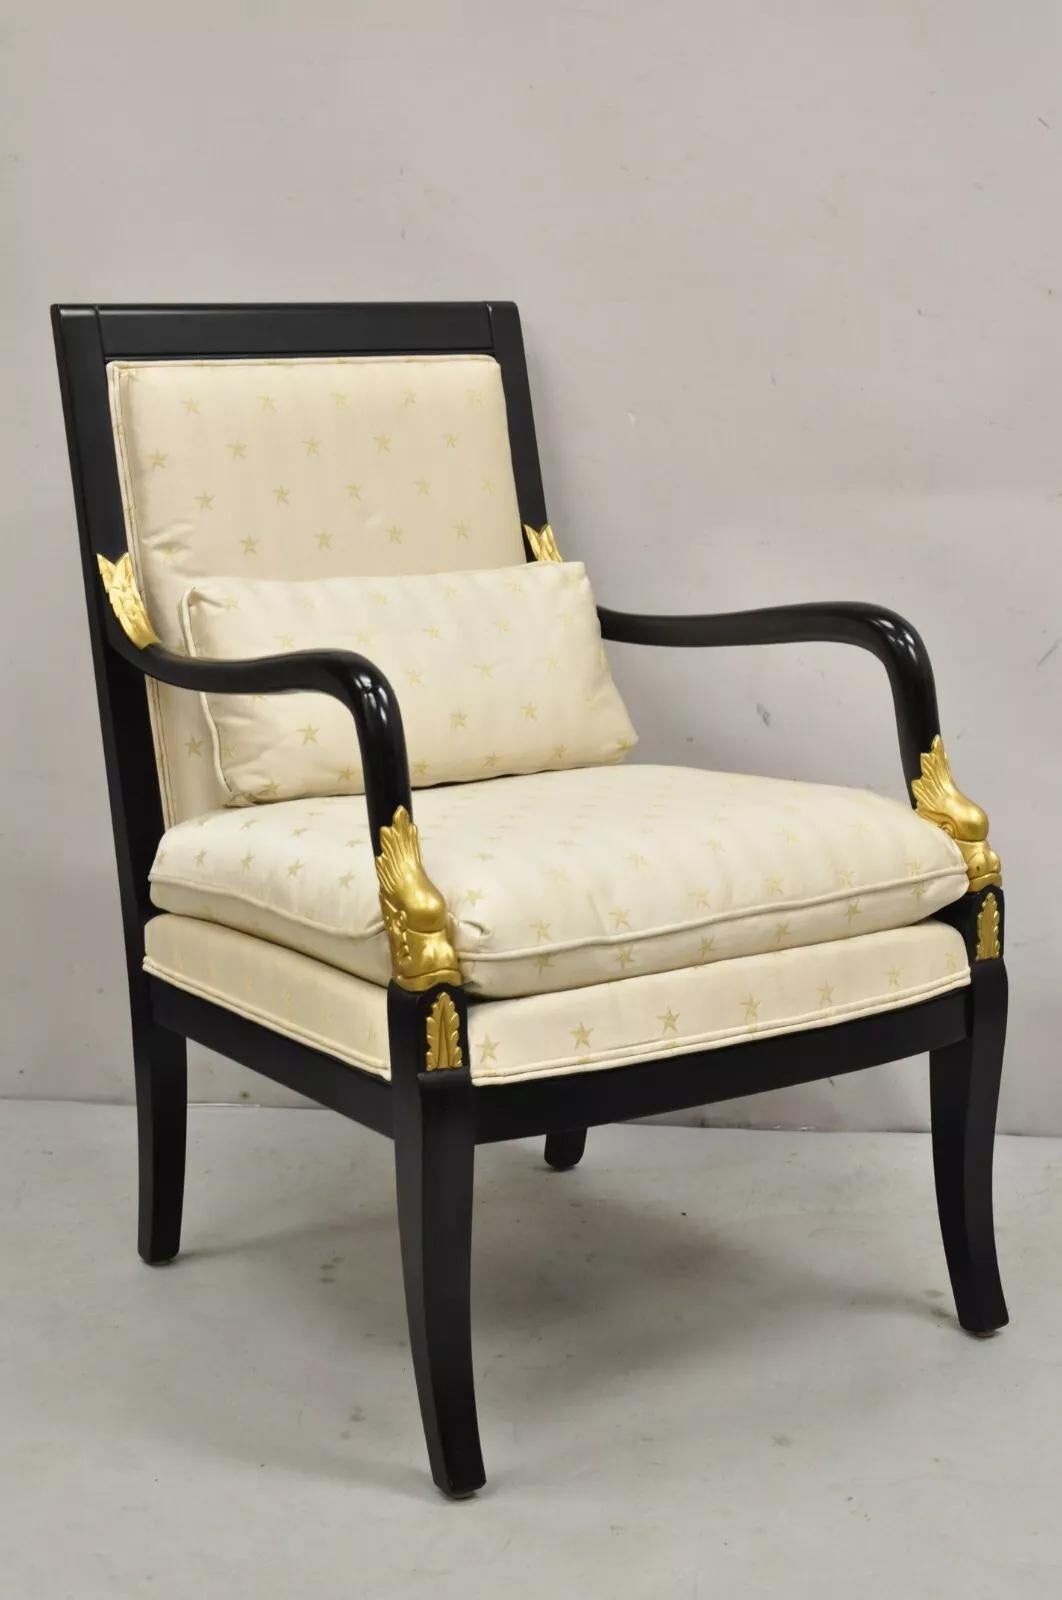 Ethan Allen French Empire Style Black Lacquer Gold Dolphin Upholstered Arm Chair For Sale 5